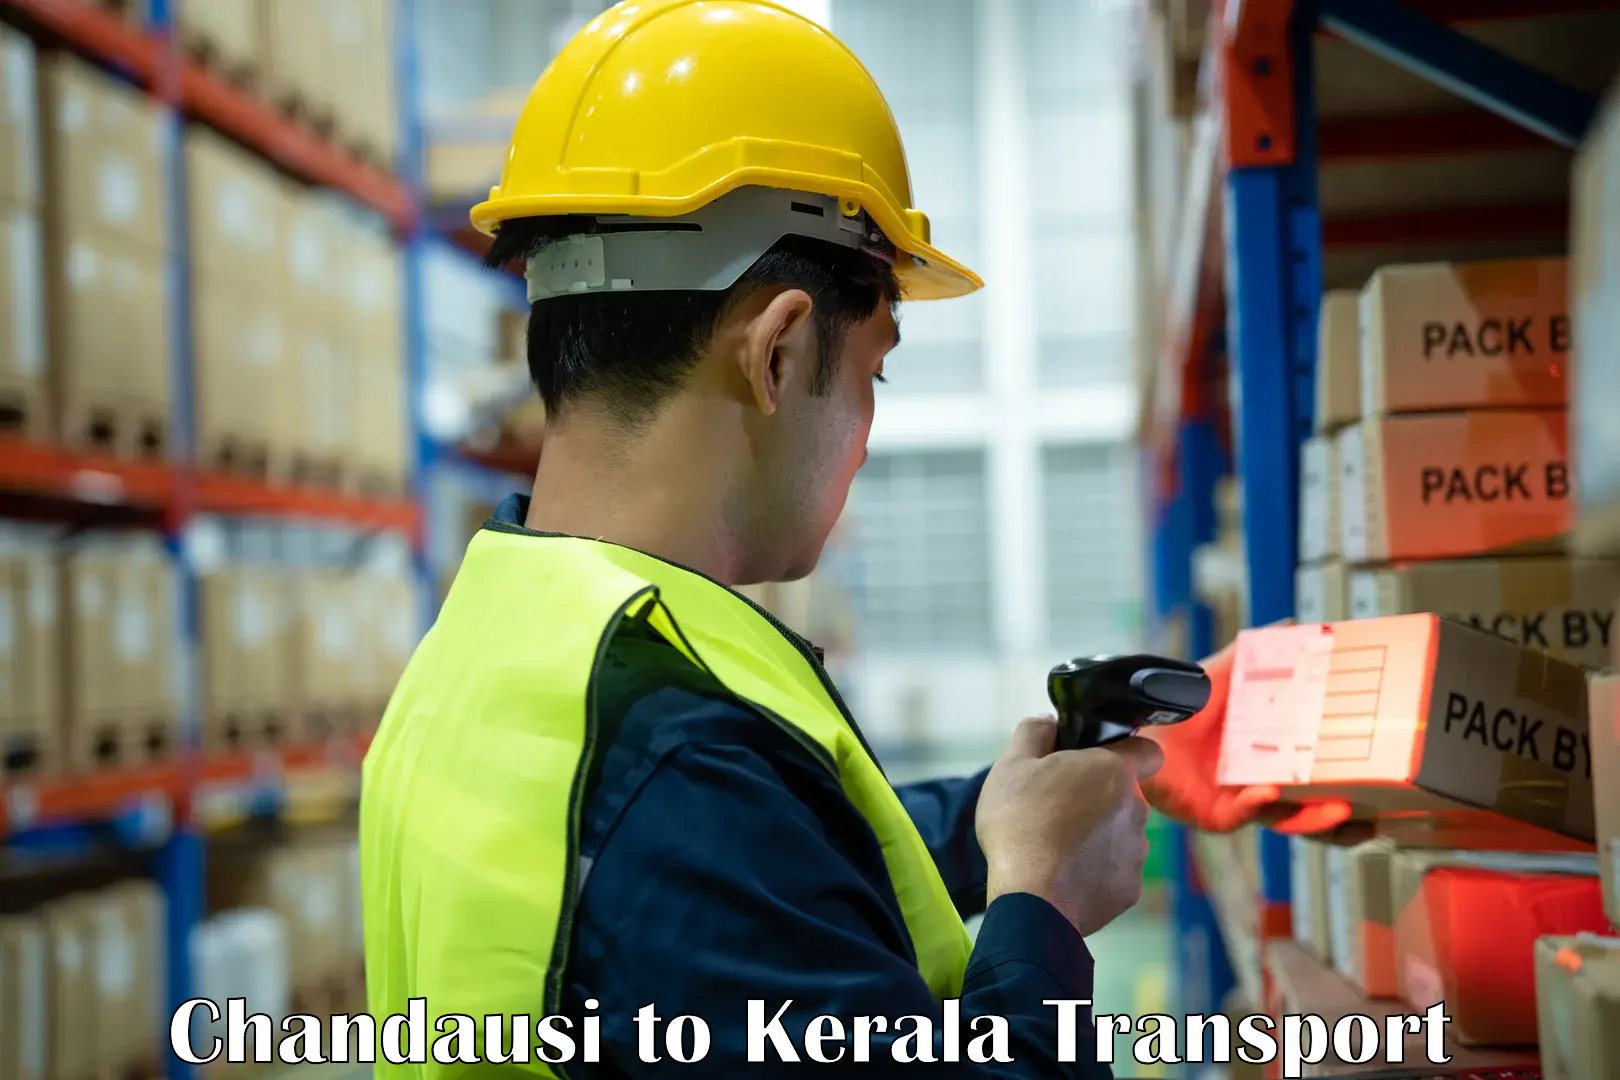 Goods delivery service Chandausi to Kerala